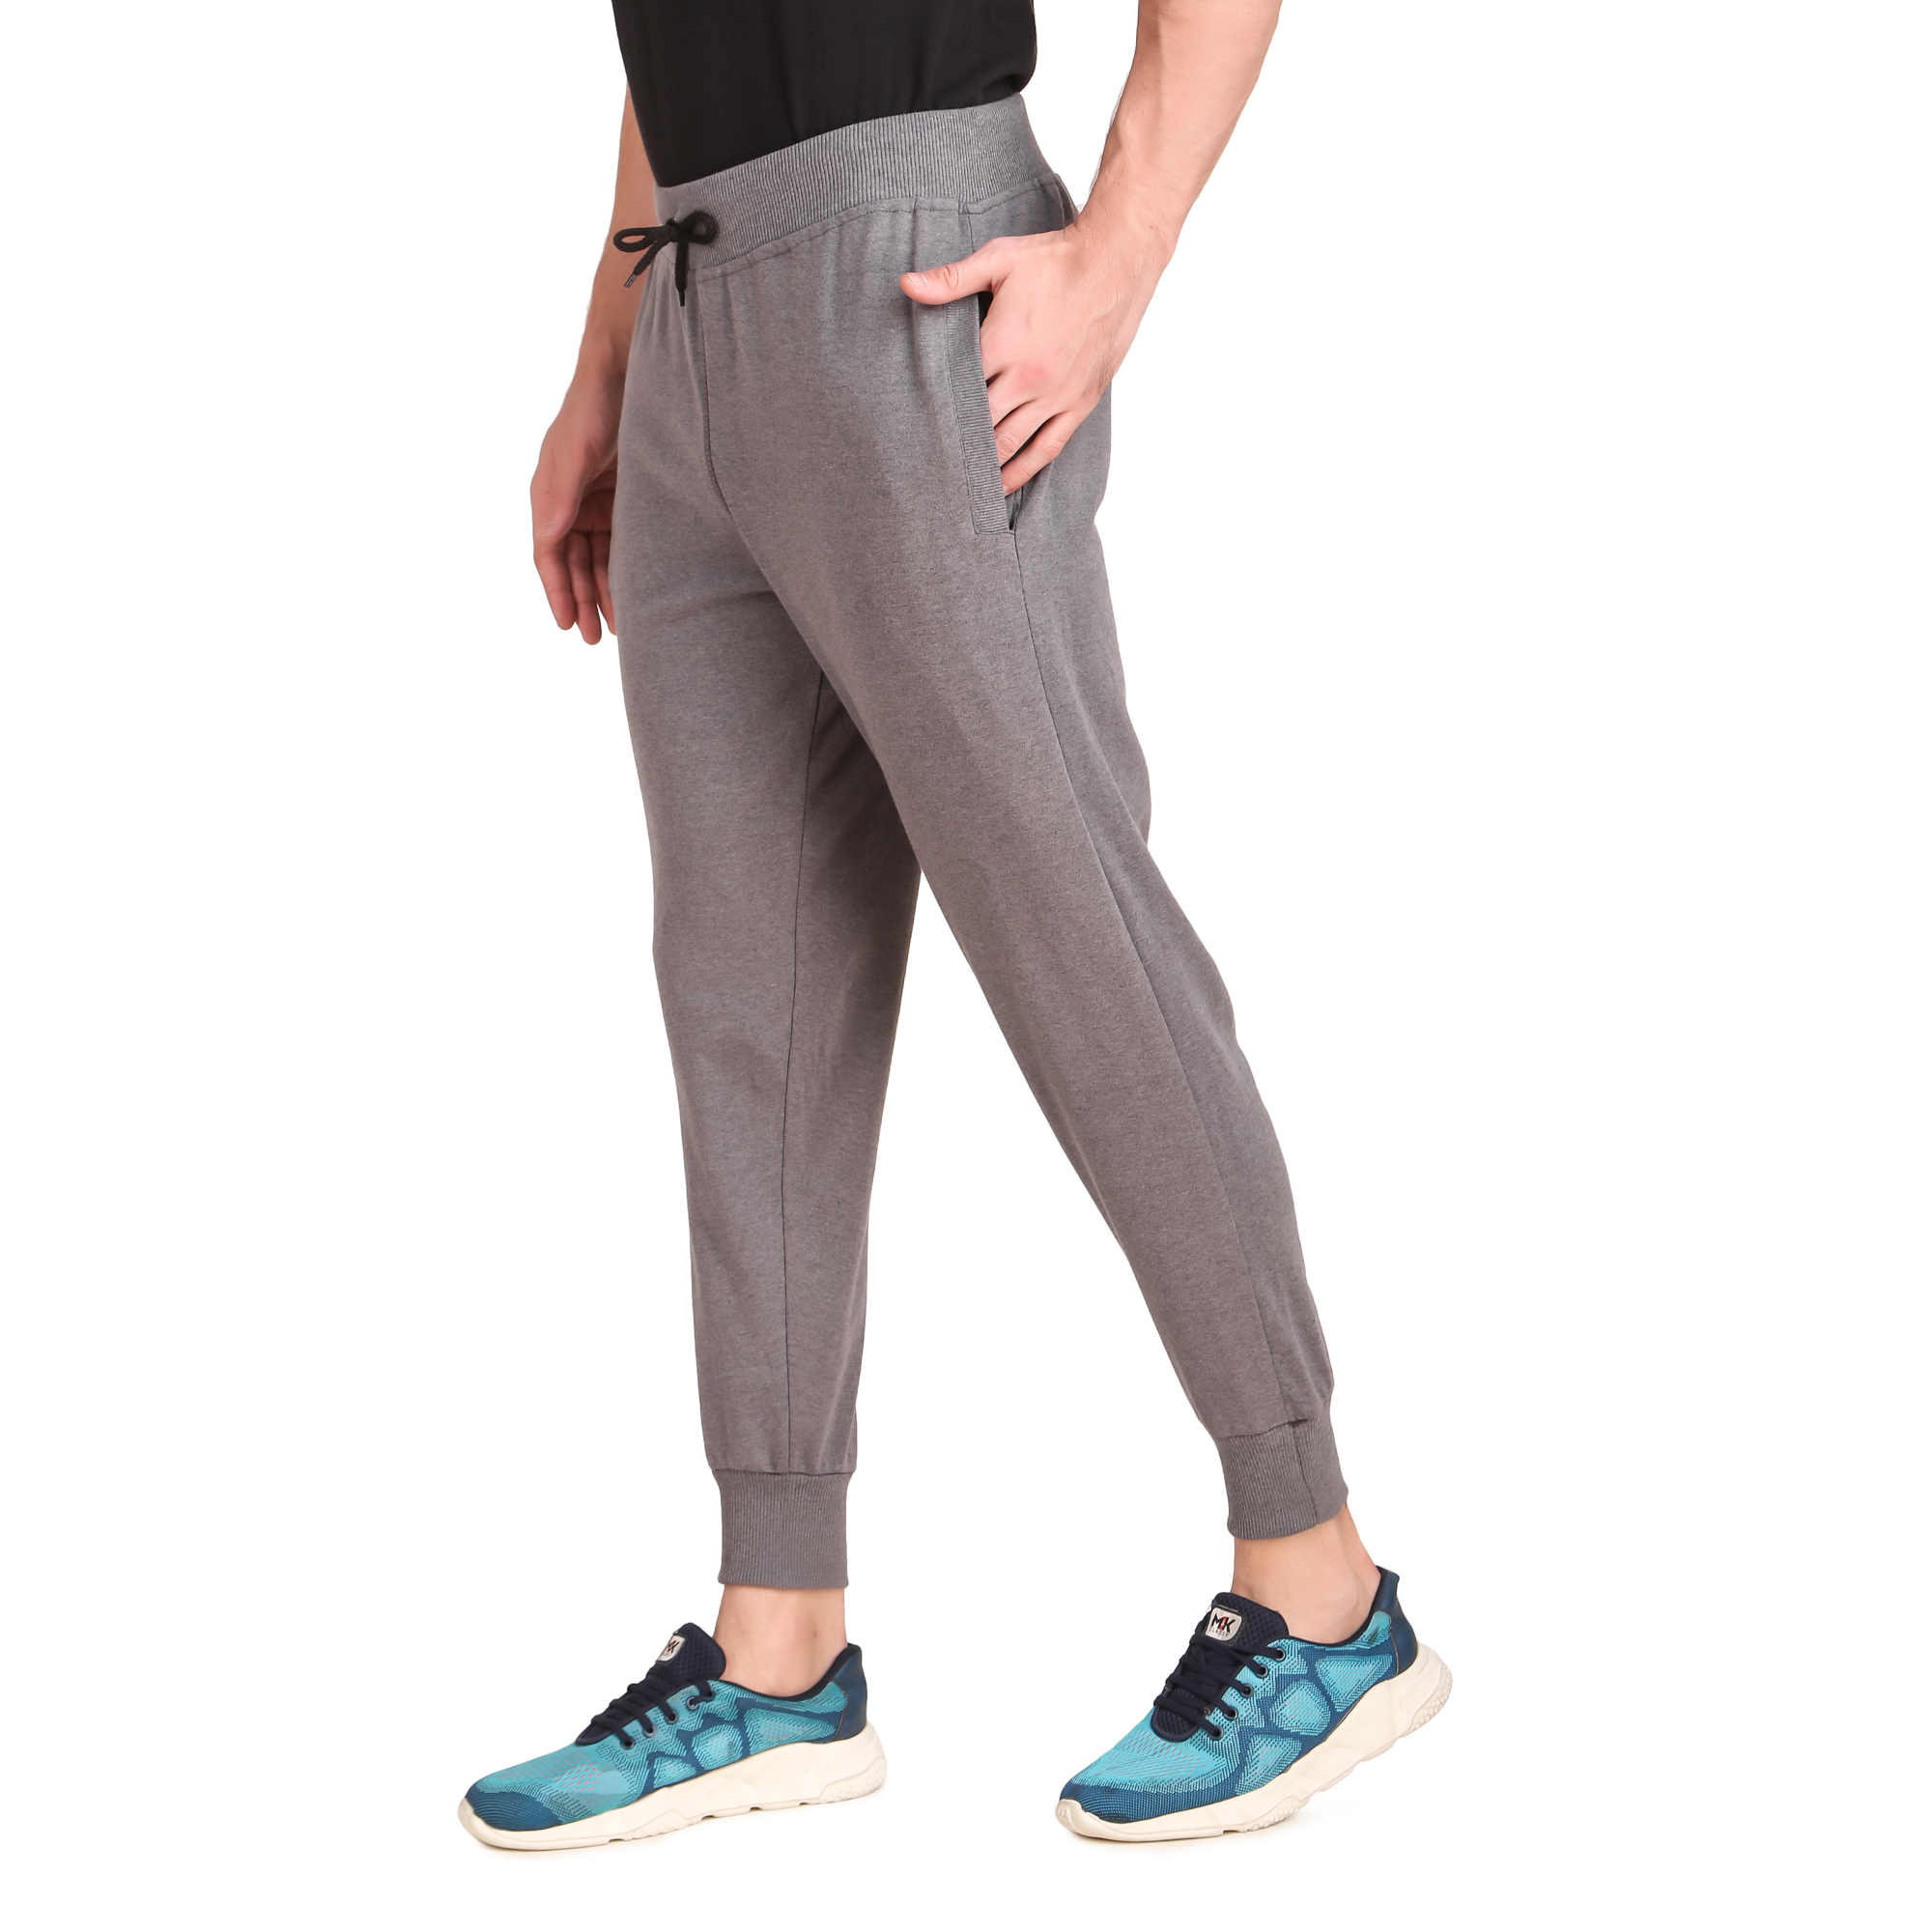 Cotton Joggers for Men's (Grey)